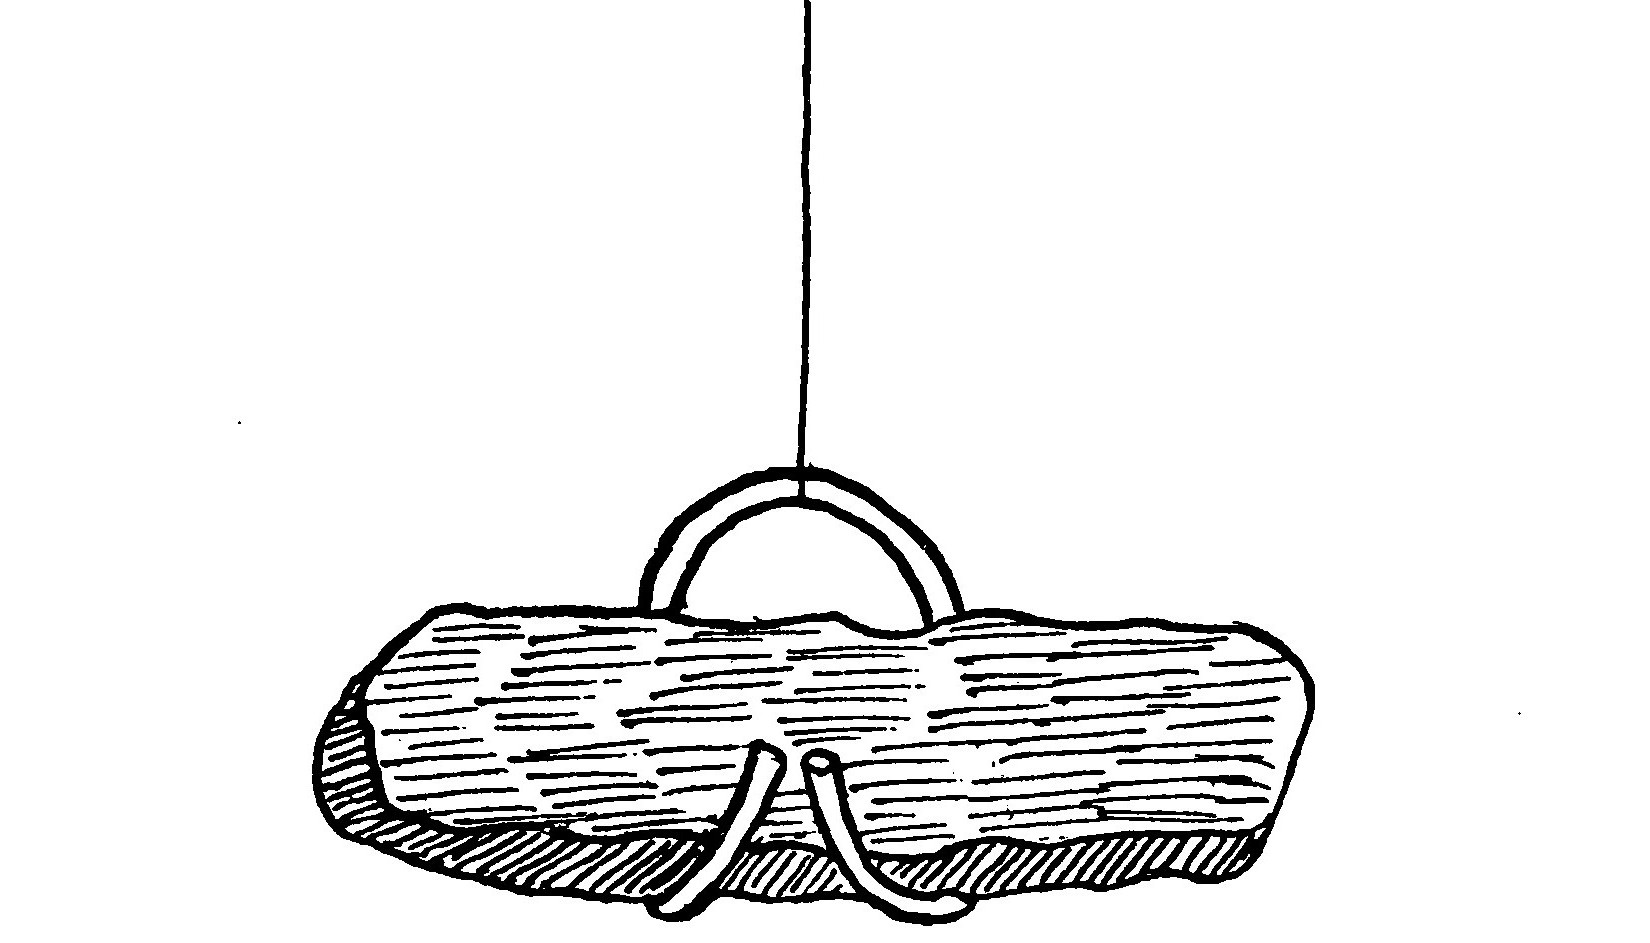 FIG. 3. Lodestone suspended from thread so as to point North and South.